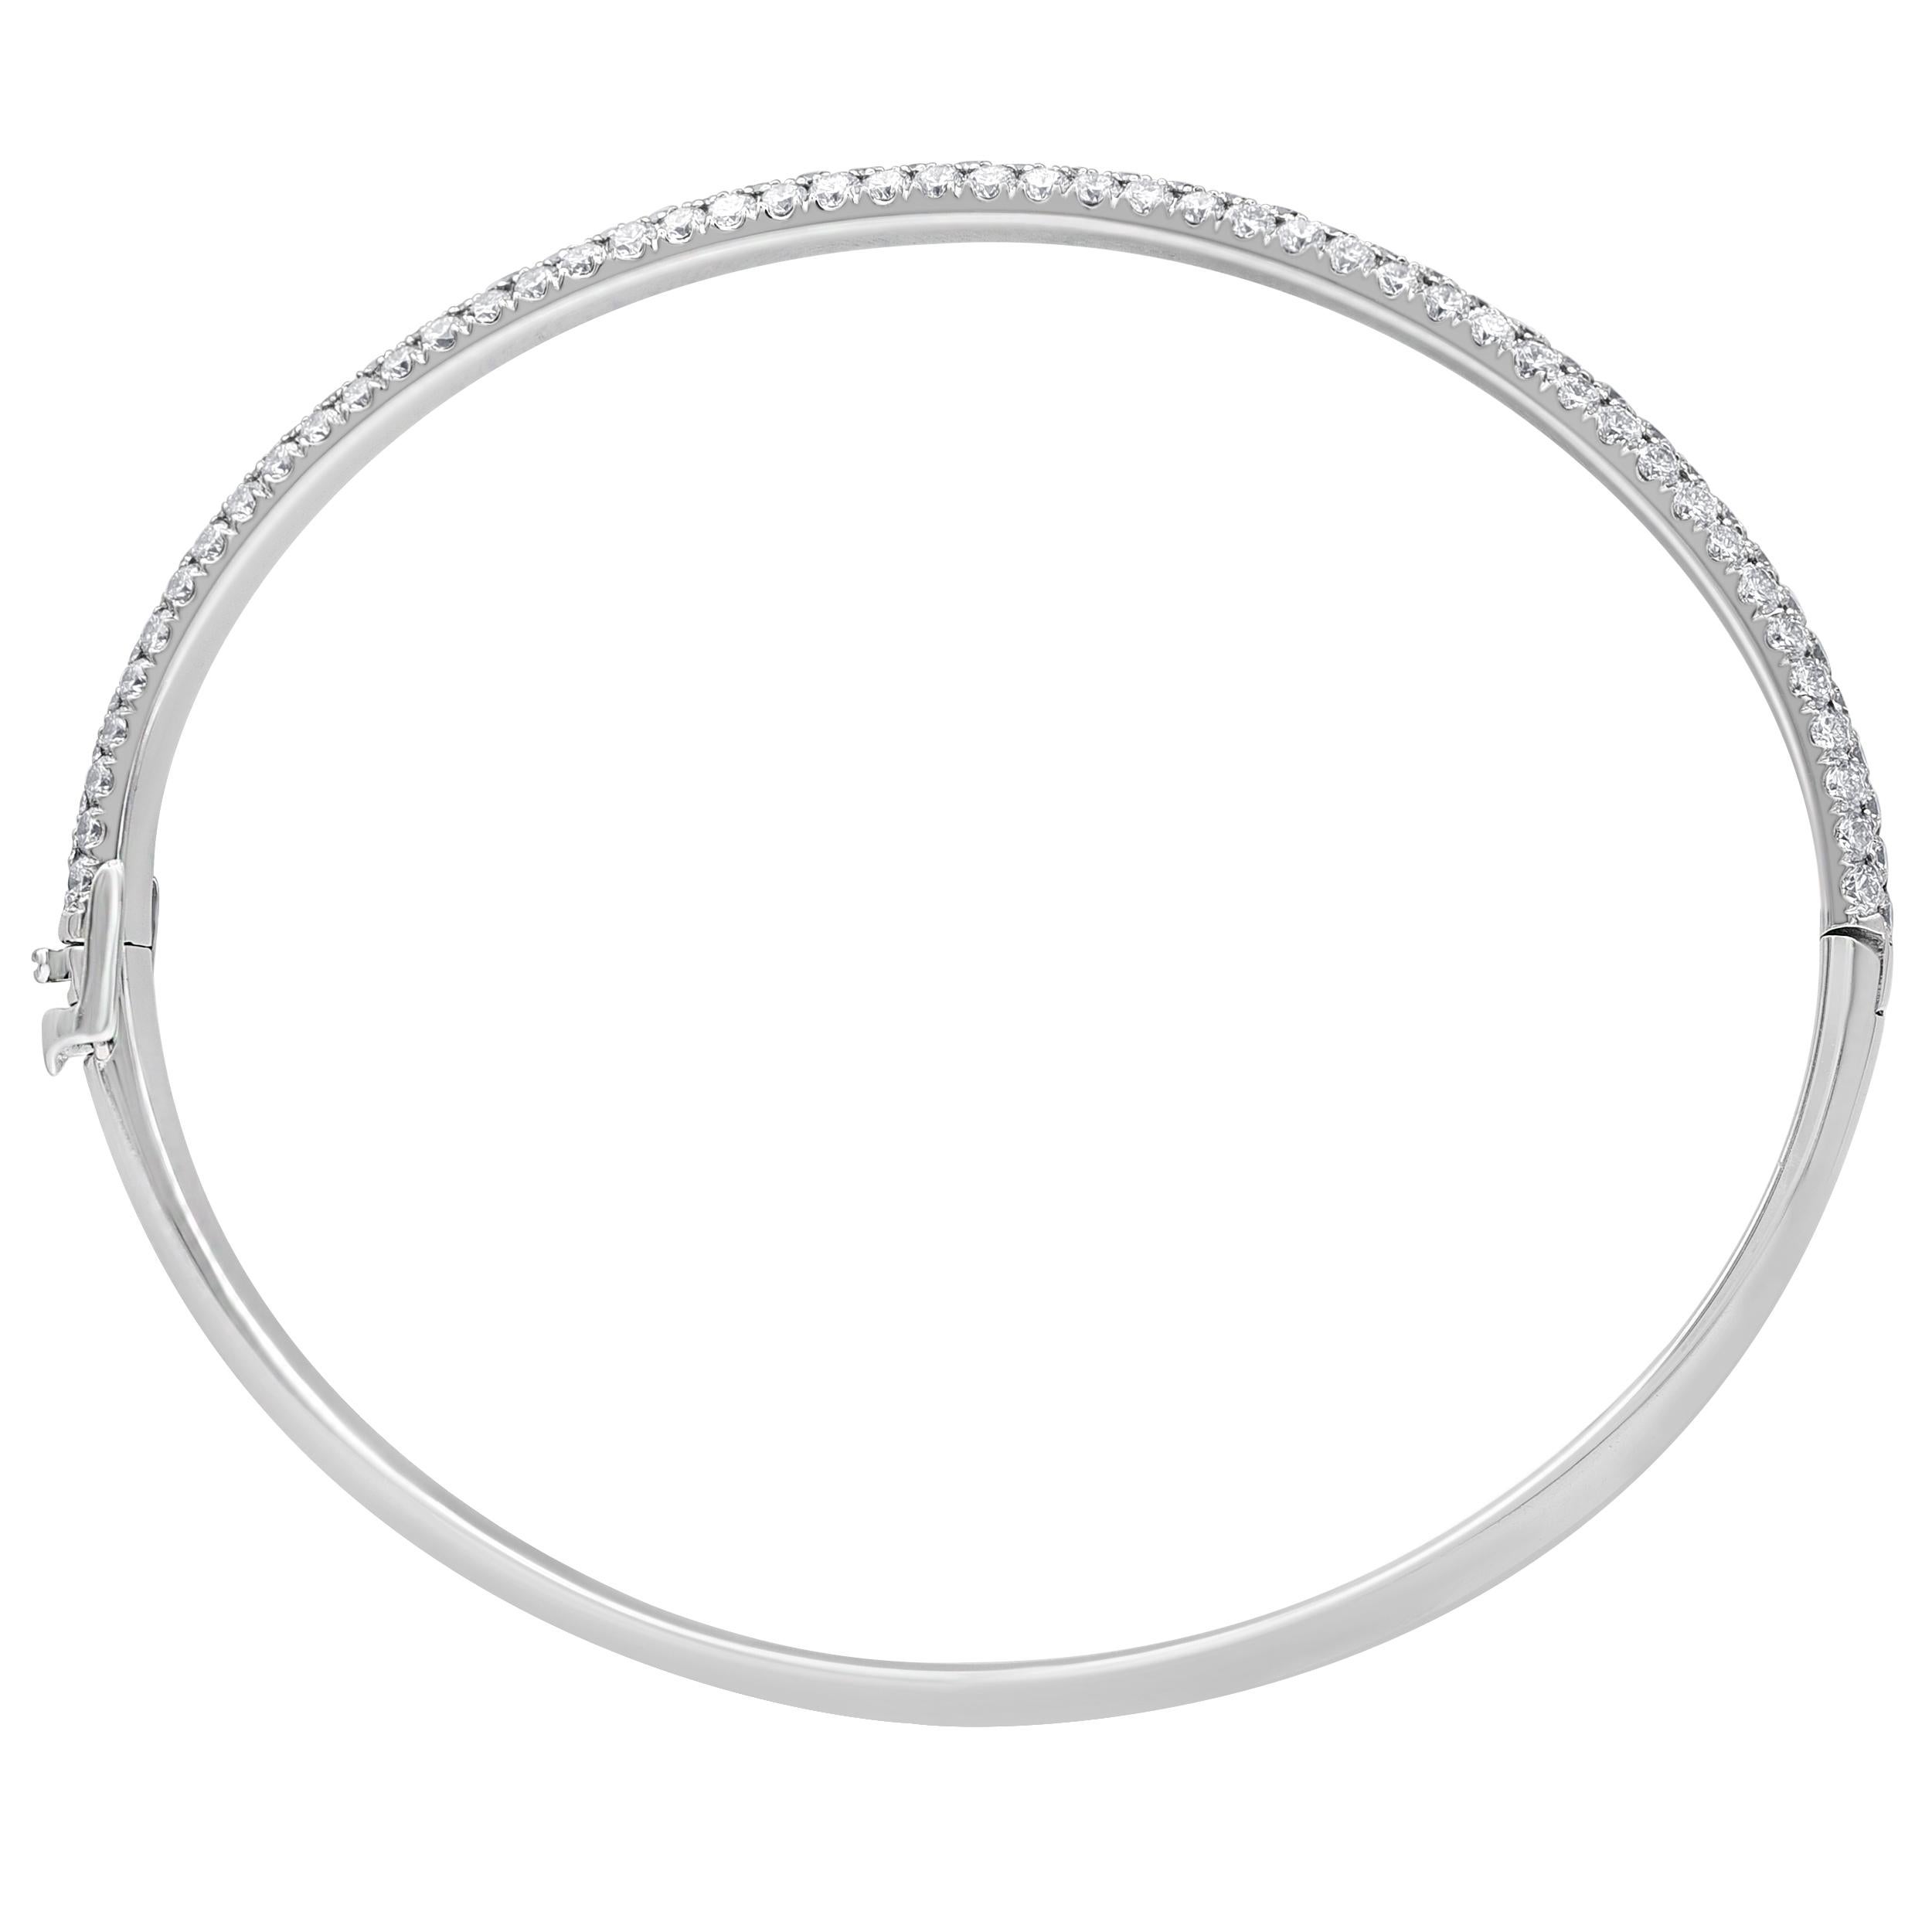 A classic style, this diamond bangle is a must-have for any jewelry collection. Created in cool 18K white gold, this choice sparkles with rows of diamonds along with the rounded band. Captivating with 3 cts of diamonds and a bright polished shine,